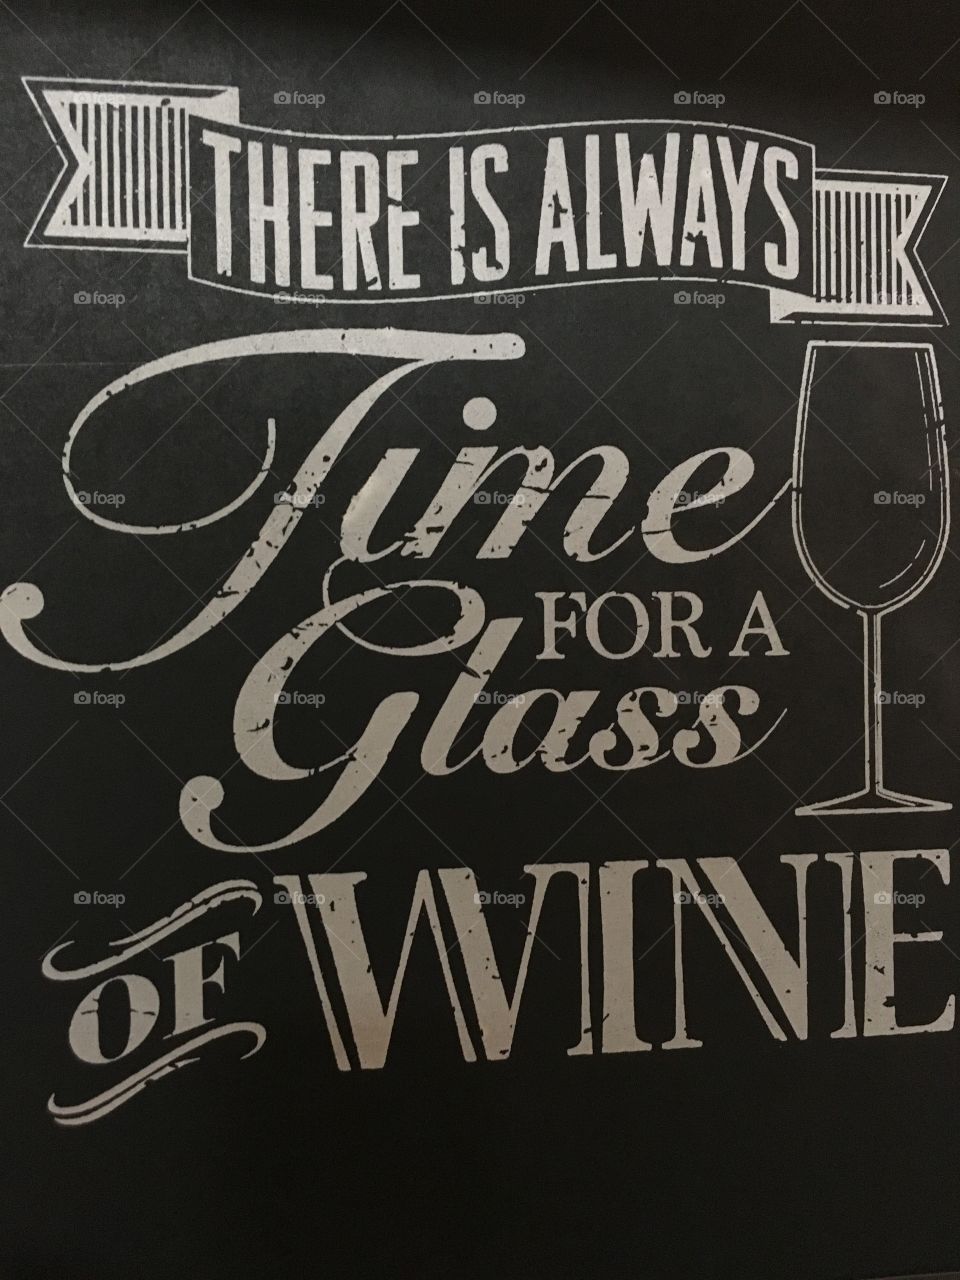 "There is always time for a glass of wine"